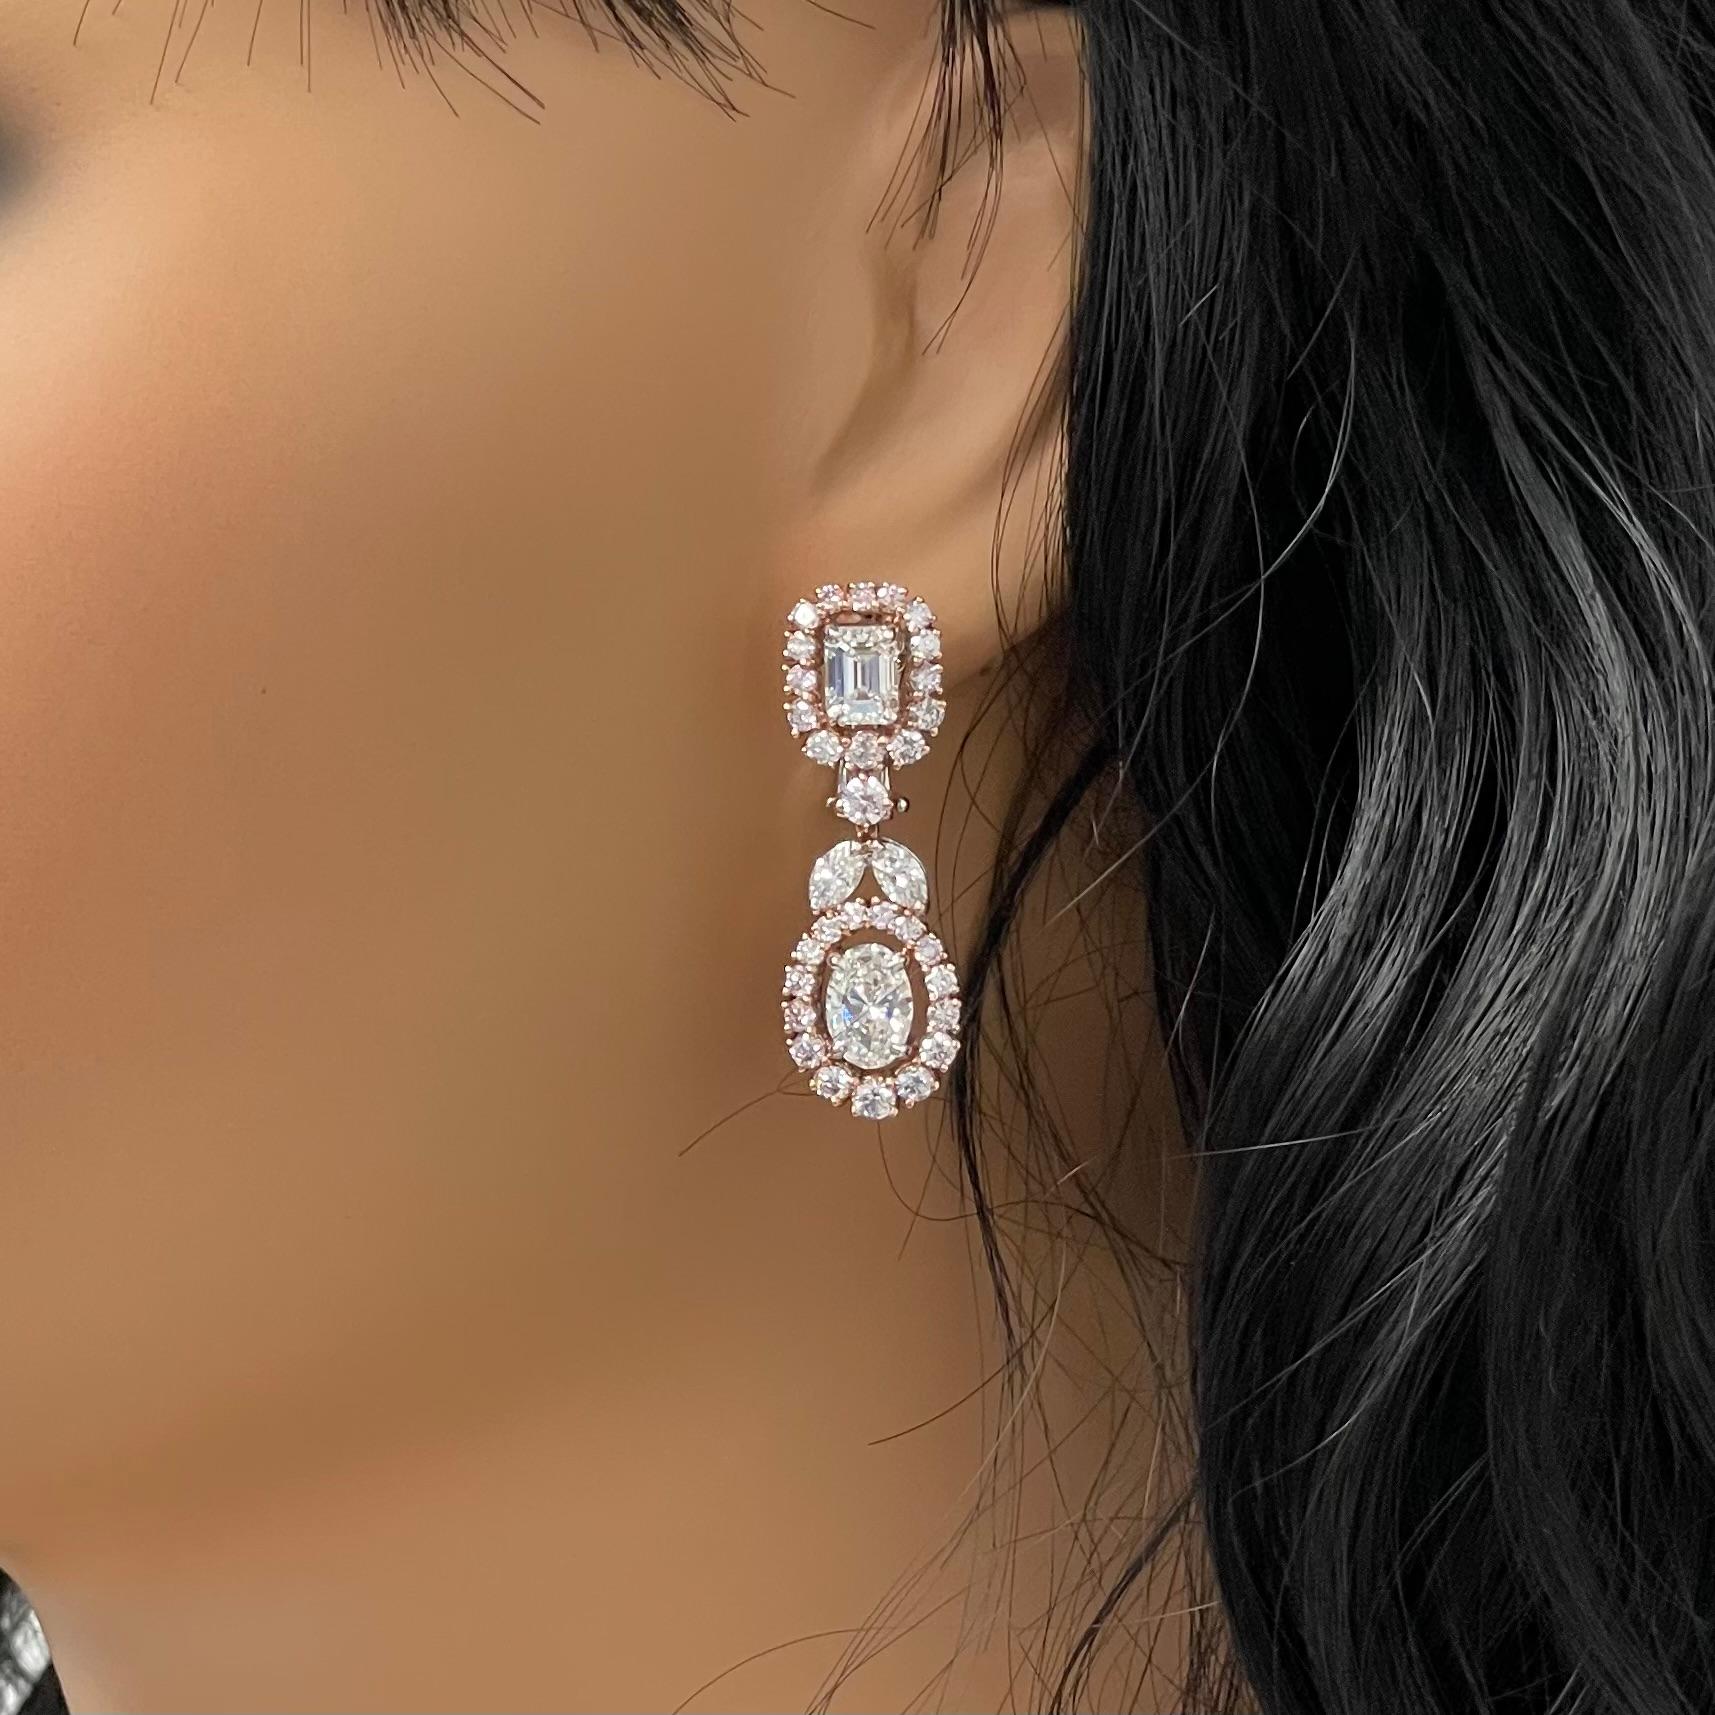 A sensual and dazzling combinations of natural pink diamonds with white marquise, emerald cut and oval shapes enables these stunning earrings to make a statement and impress with their simplicity. Showcasing 4 GIA certified and matched EF color IF -